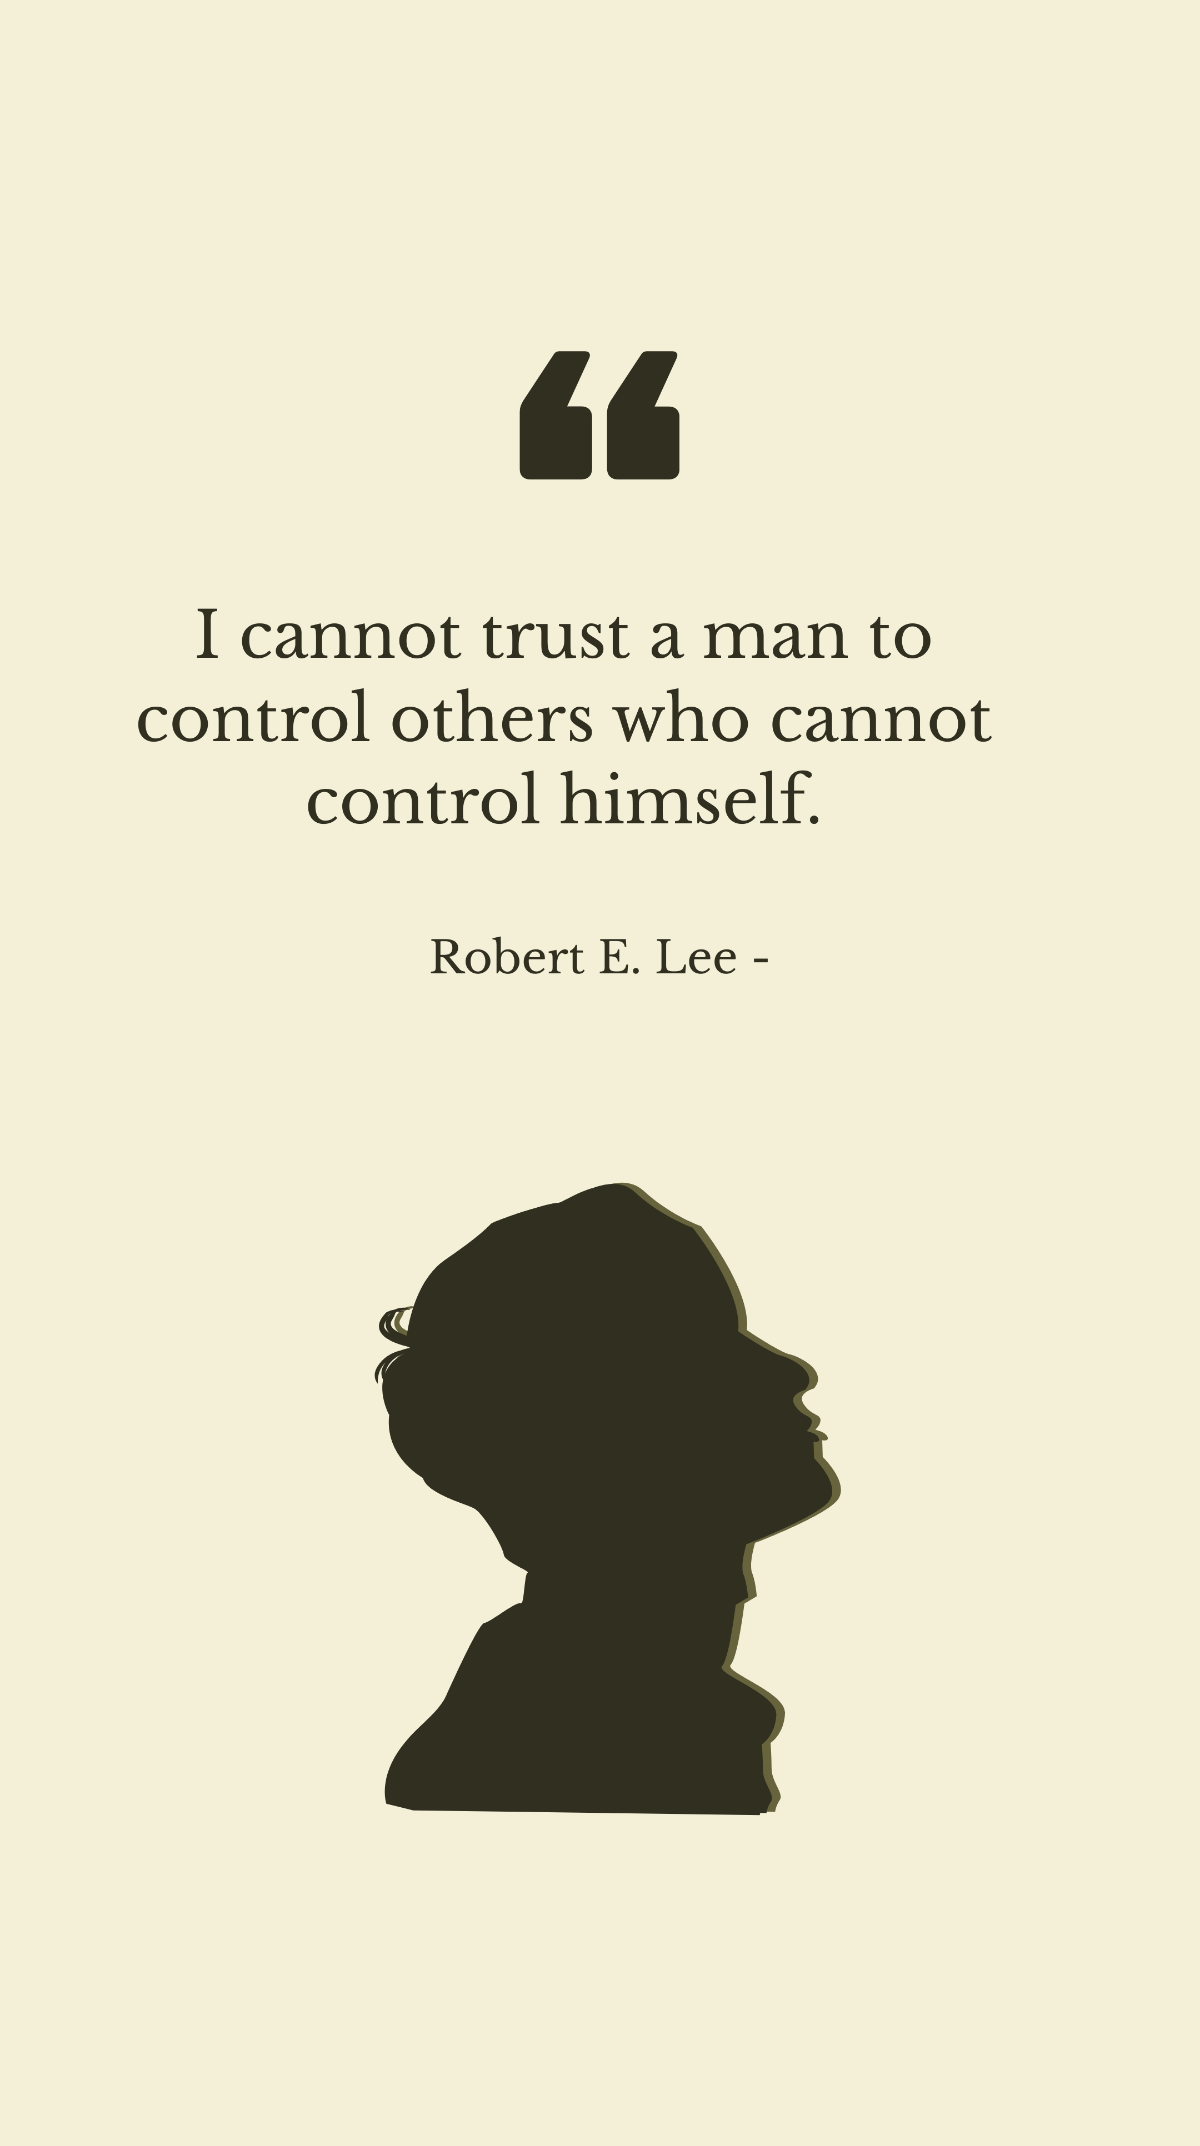 Free Robert E. Lee - I cannot trust a man to control others who cannot control himself. Template